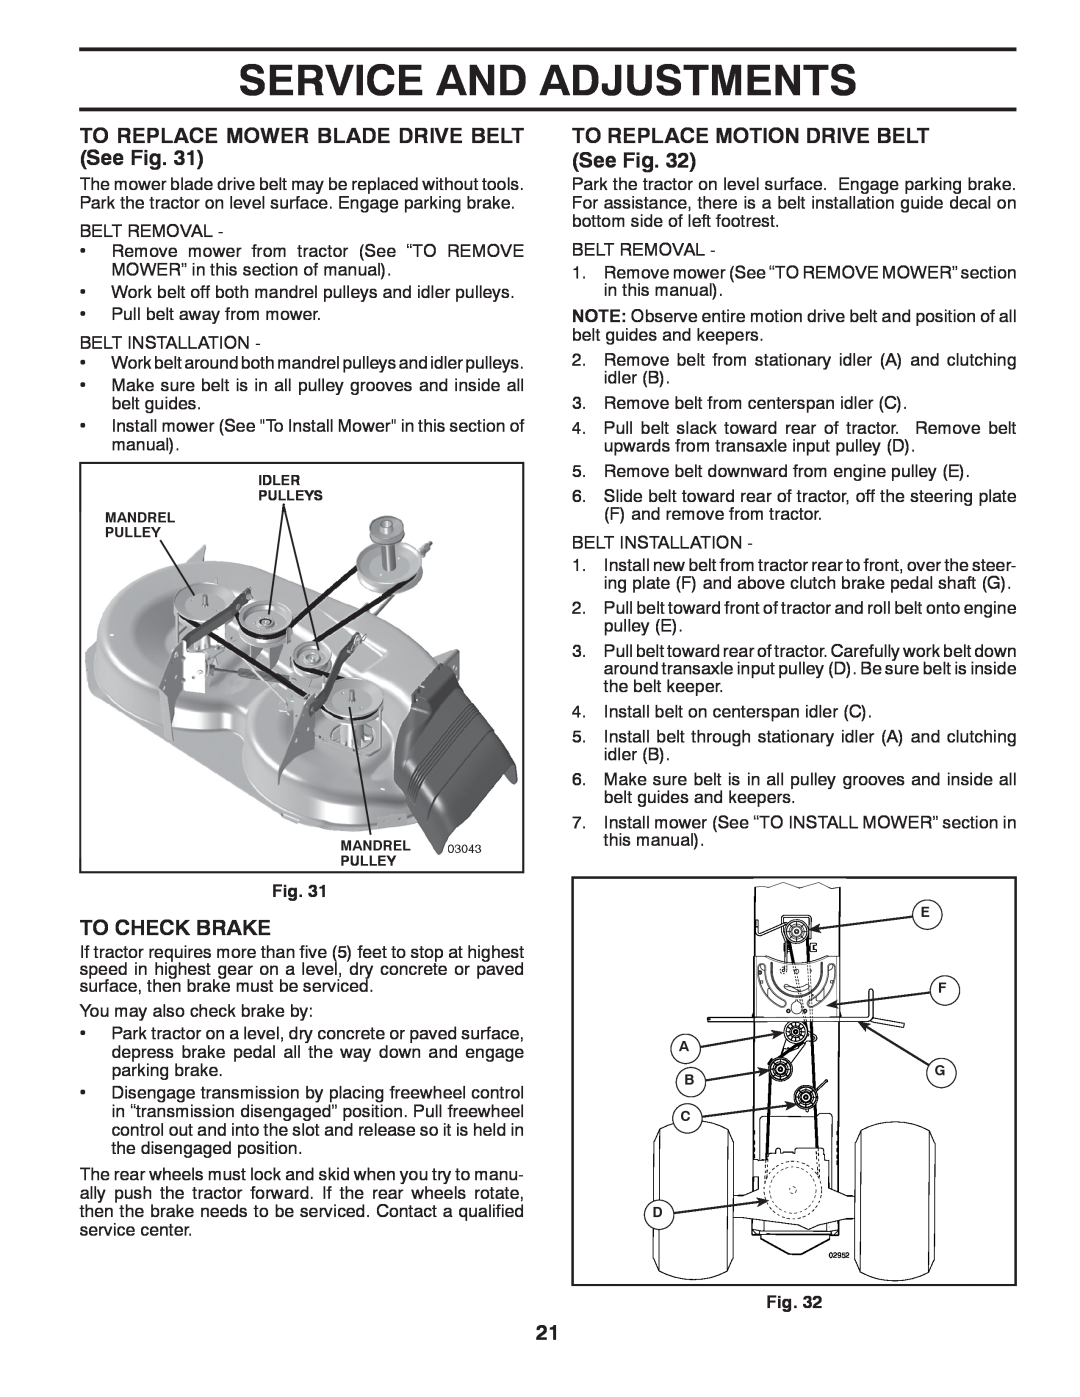 Poulan 96042012500 manual TO REPLACE MOWER BLADE DRIVE BELT See Fig, To Check Brake, TO REPLACE MOTION DRIVE BELT See Fig 